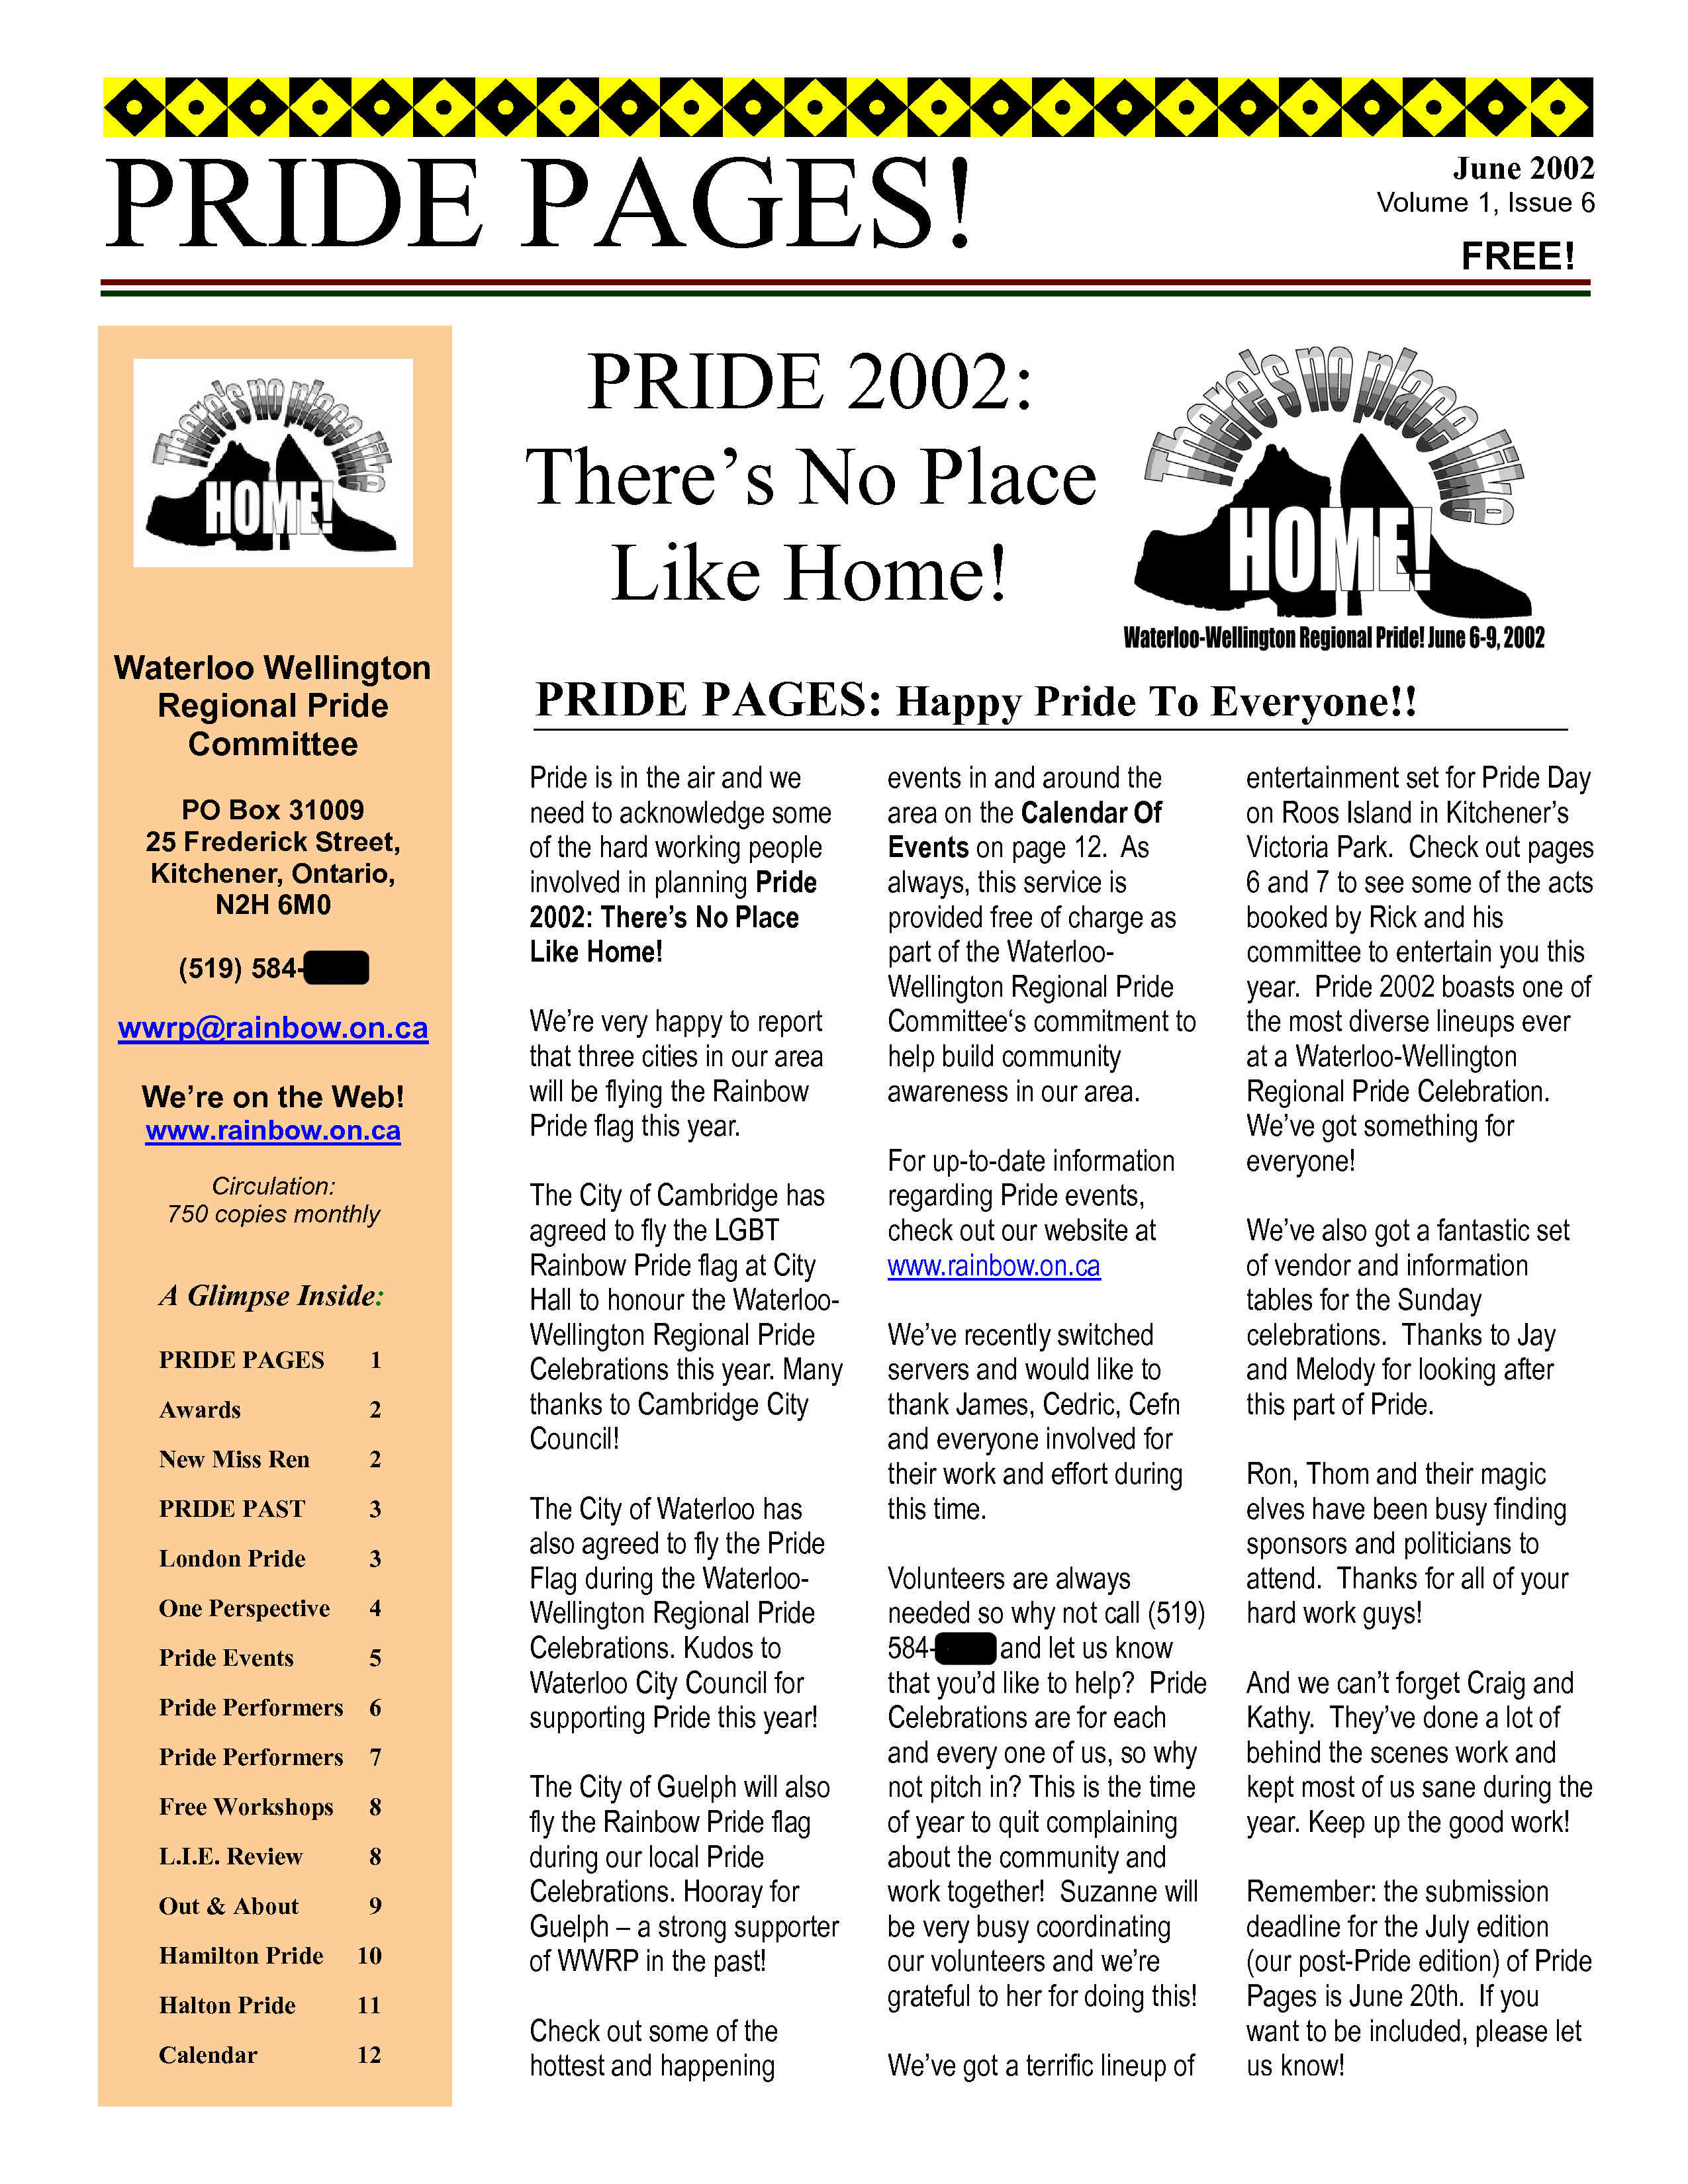 Pride Pages 2002-06 p1